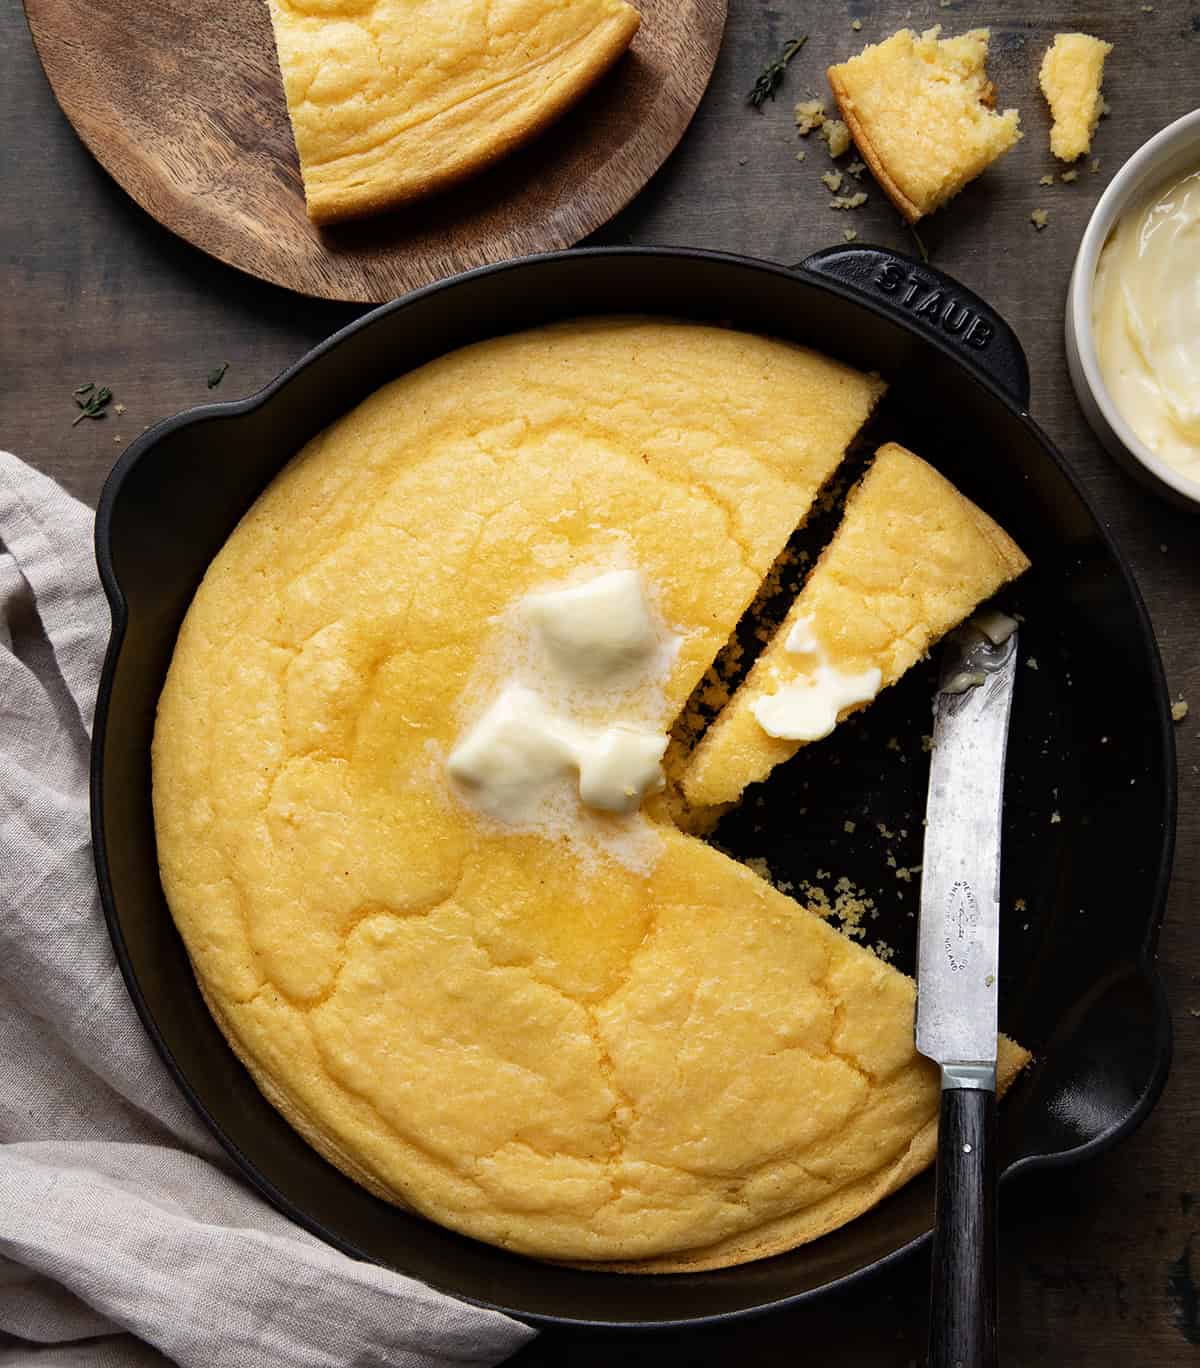 Skillet of Country Homestyle Cornbread on a wooden table from overhead with a few pieces cut out.